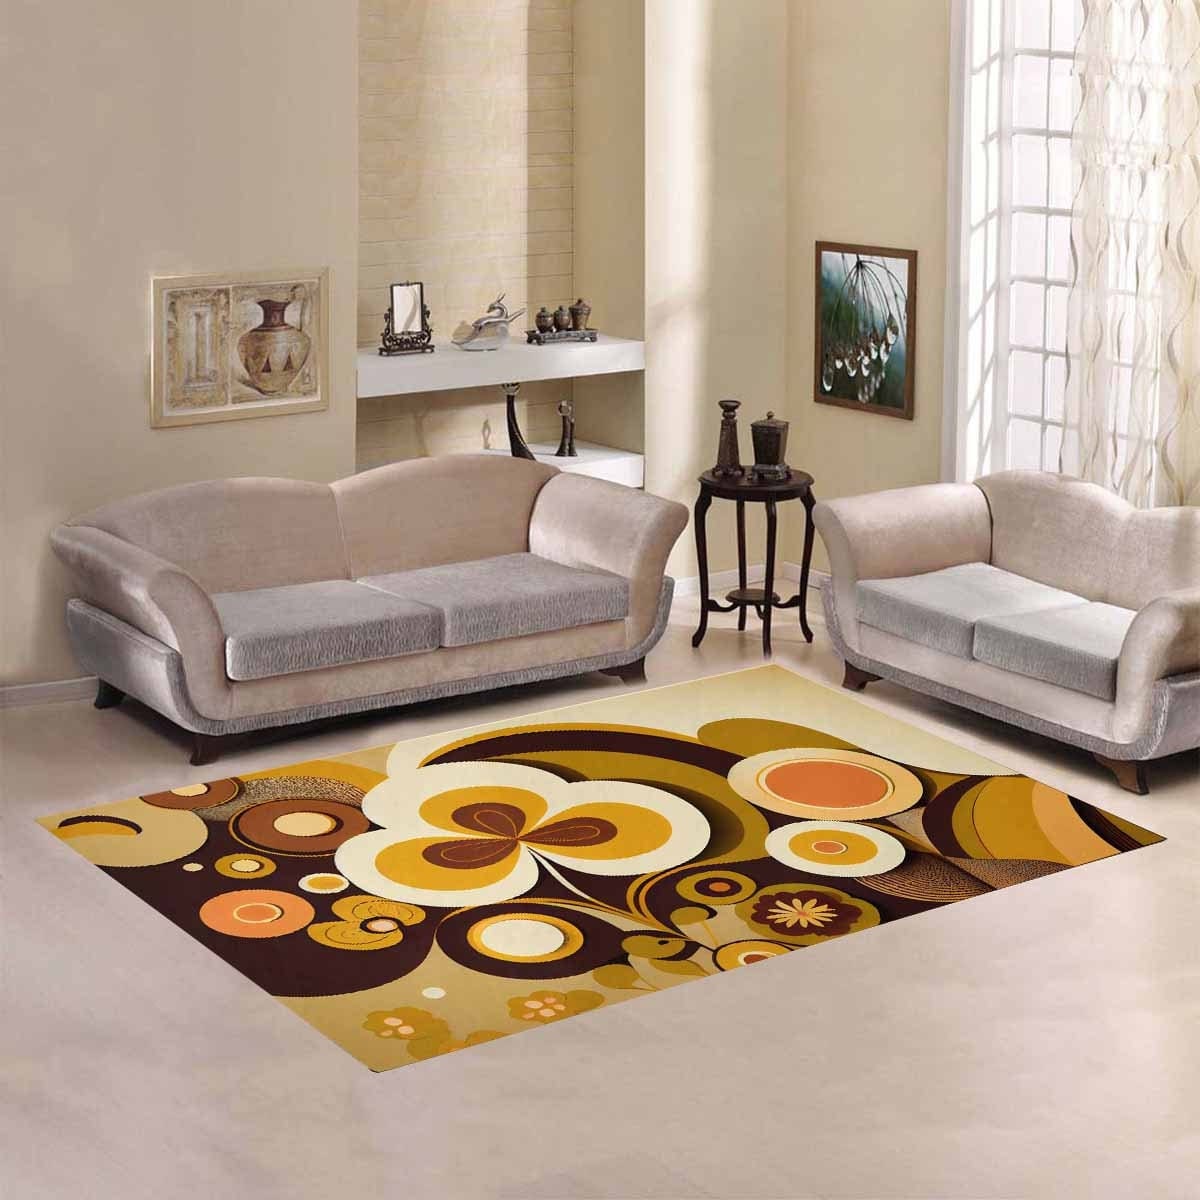 Kate McEnroe New York 60s MCM Geometric Retro Area Rug, 70s Groovy, Hippie Bold Abstract Accent Rug, Mid Century Modern Living Room, Bedroom Carpet - 123681223 Rugs